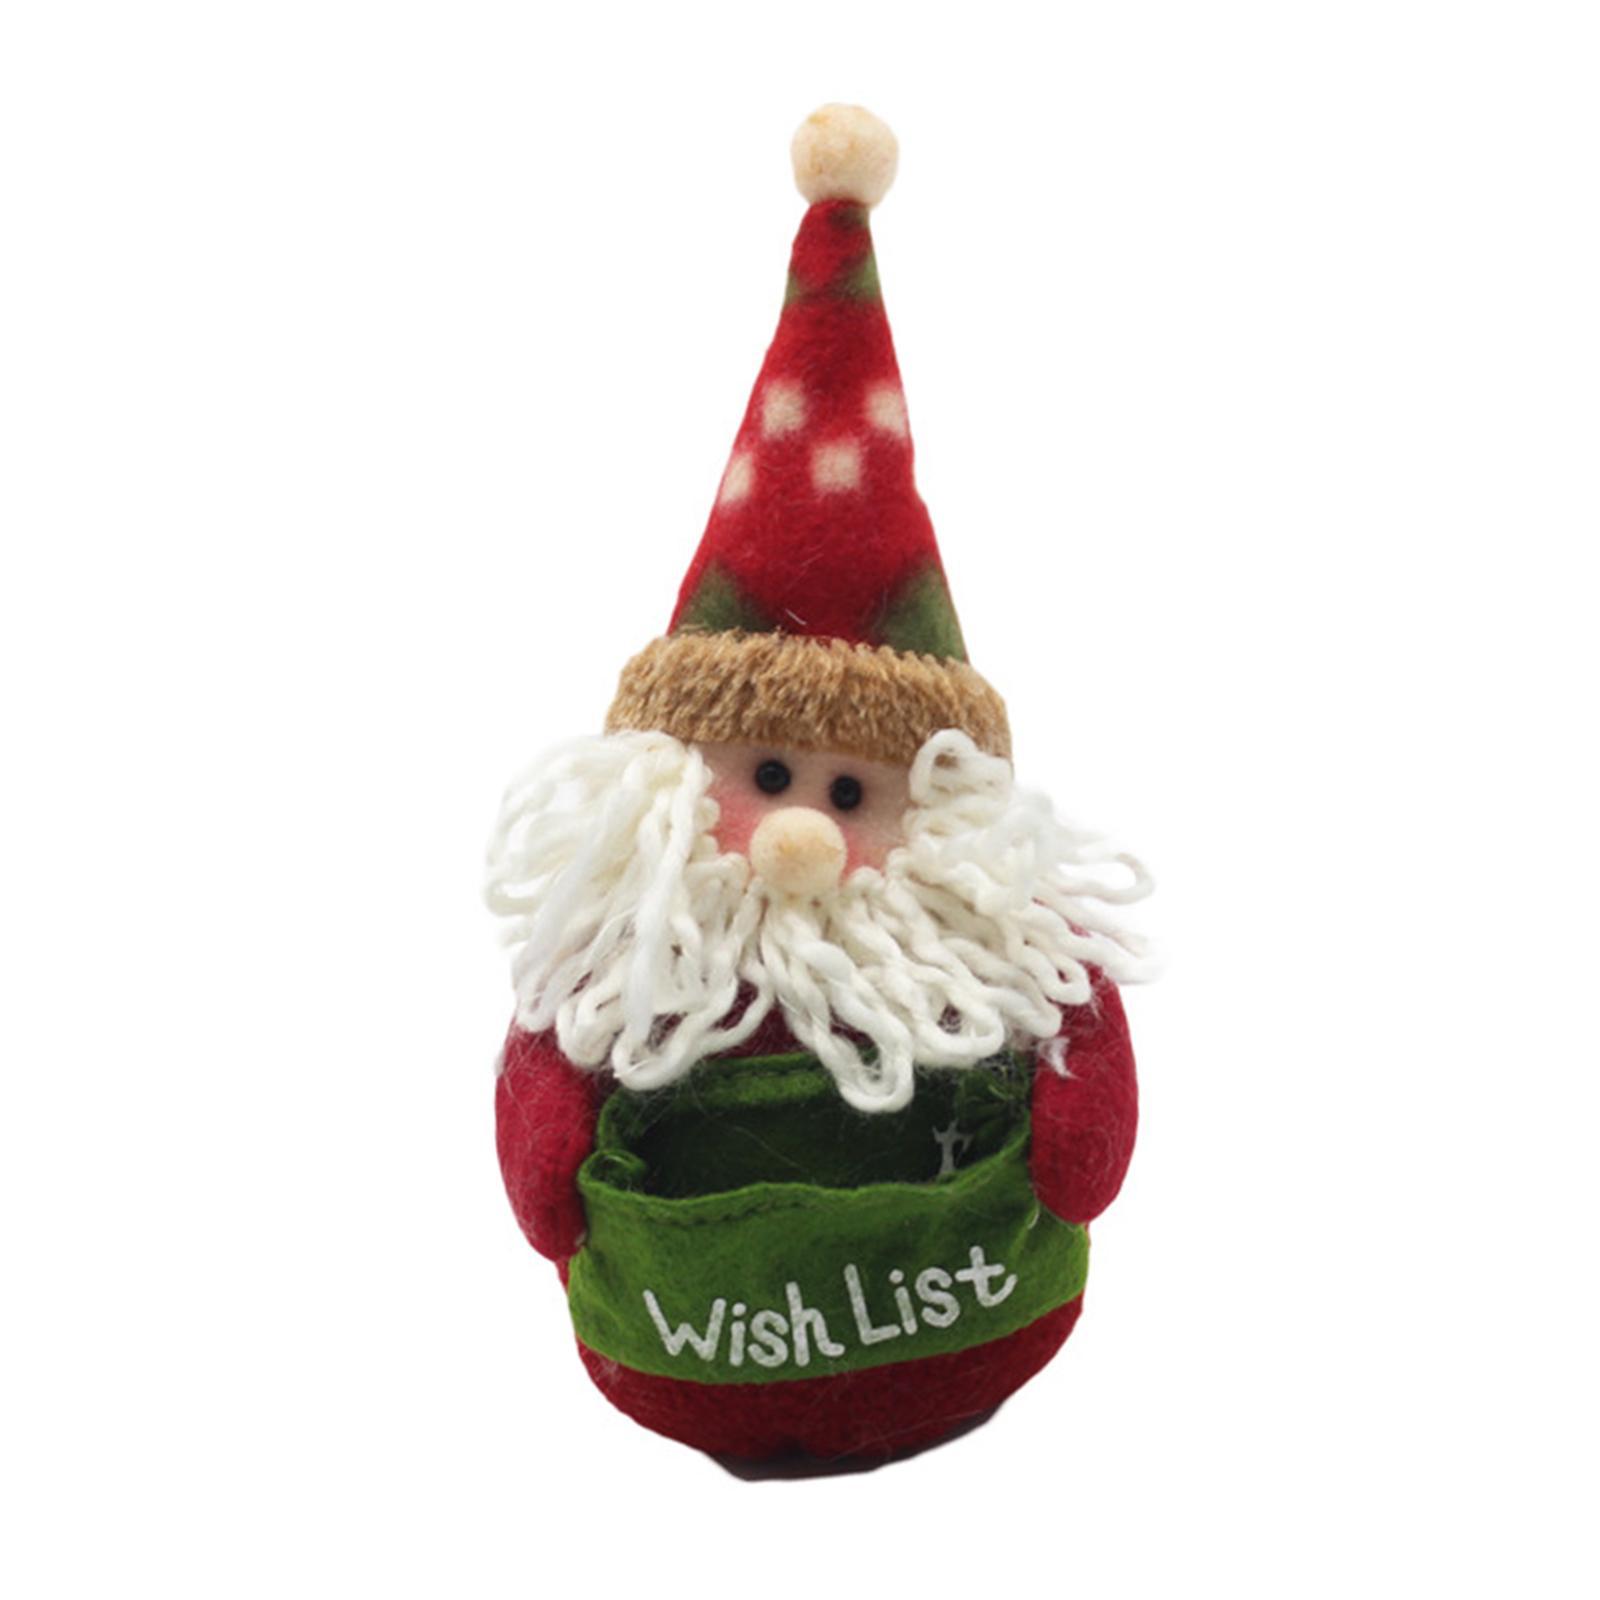 Cute Figurine Doll, Ornament, Decorative, for Decoration Bedroom Table Holiday Gift